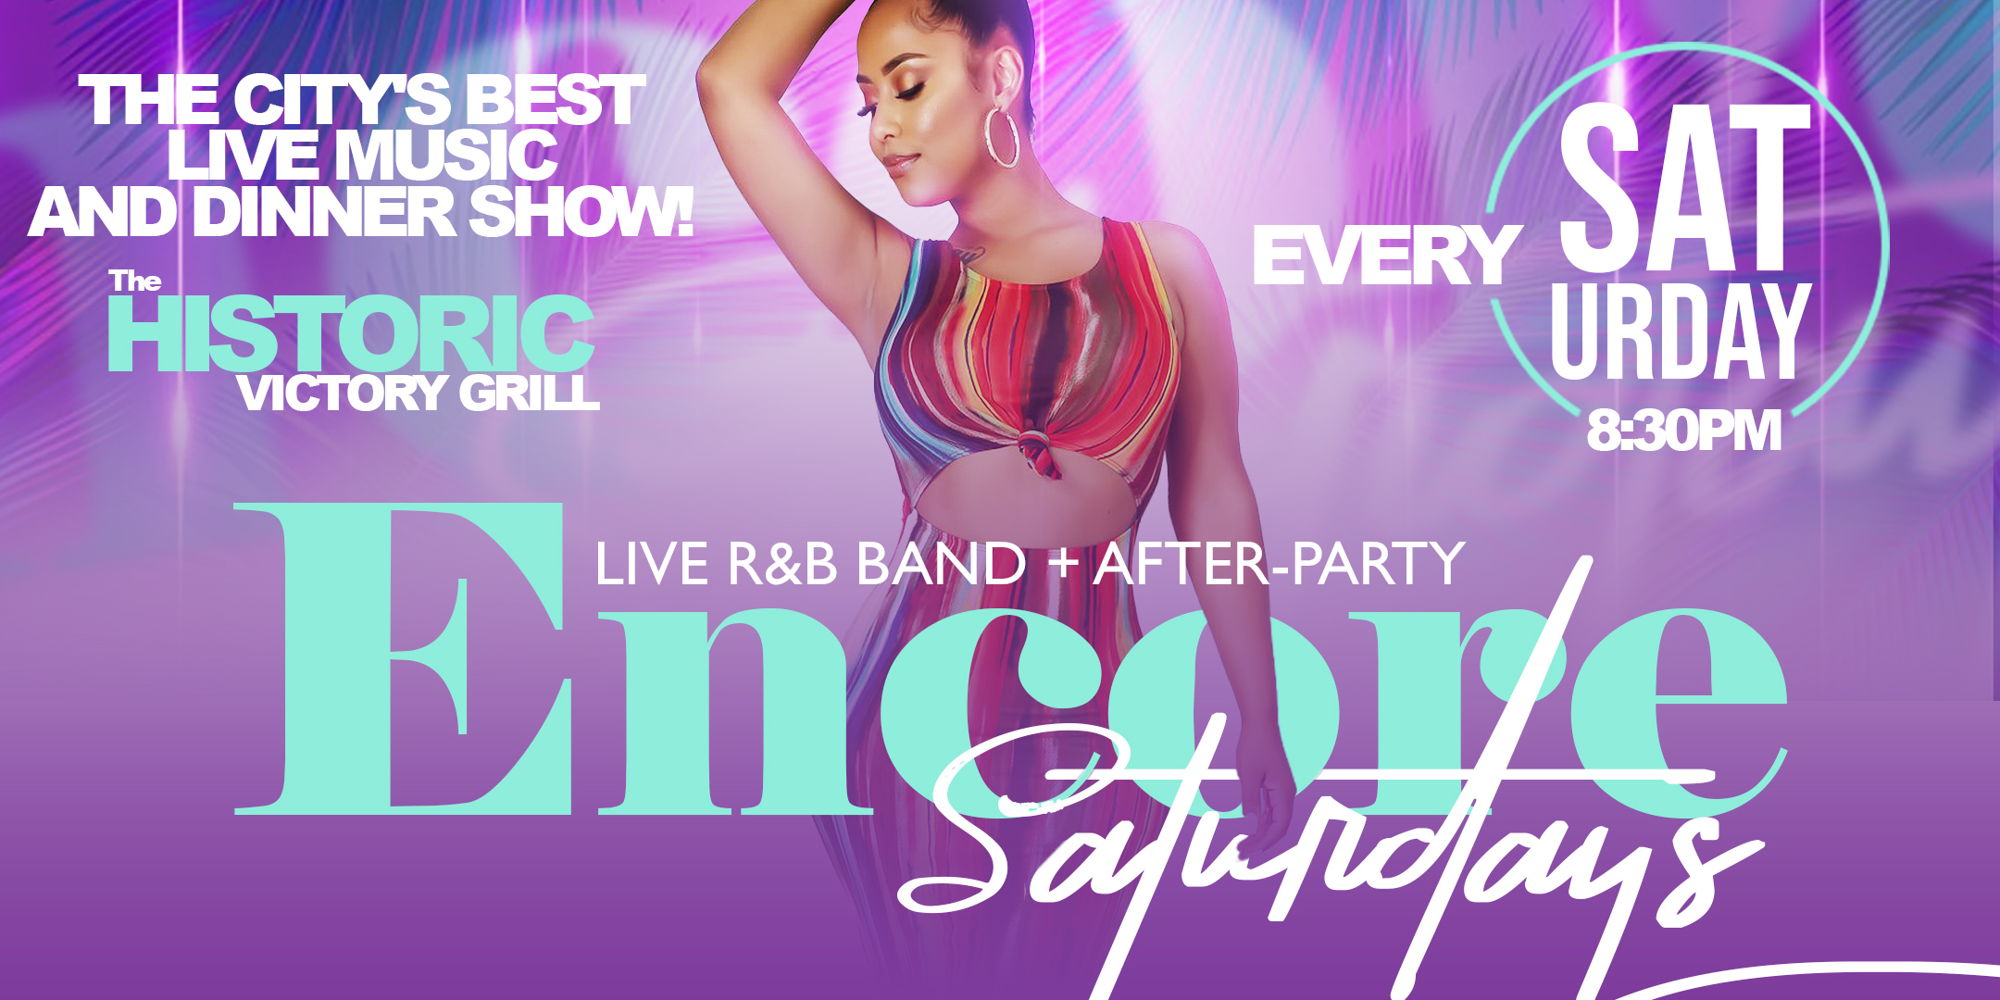 Encore Saturdays | Dinner, Live Band, After-Party promotional image